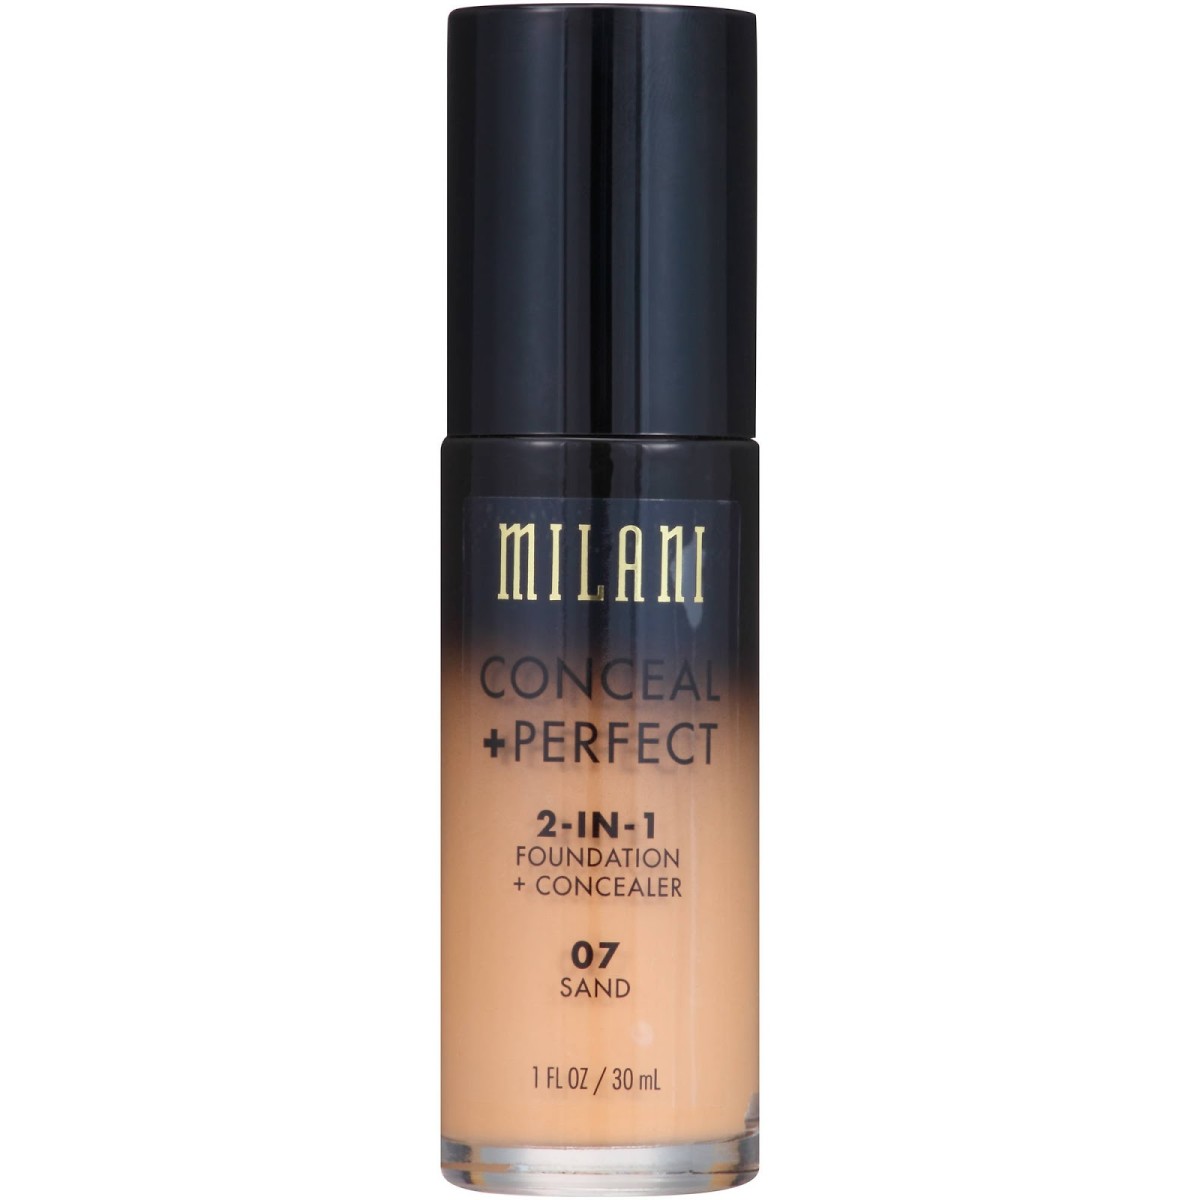 milani-conceal-perfect-2-n-1-foundation-concealer-review